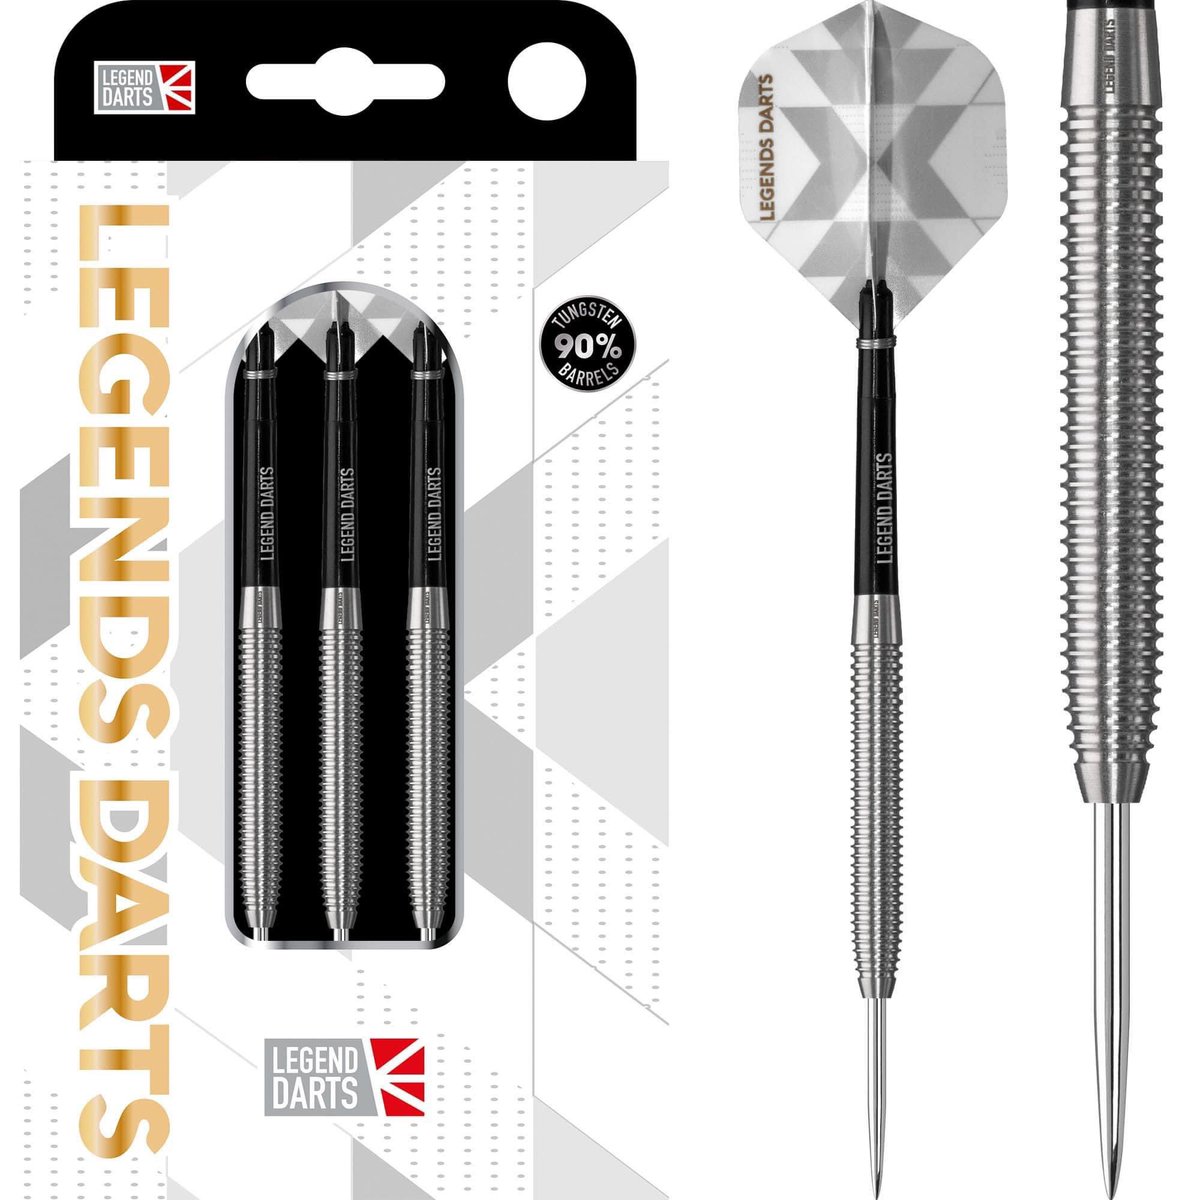 Have you seen our Legend Range yet?🤔 Check out our V10 & V6‼ Shop the whole Legend Pro Series ⬇ bit.ly/LegendProDarts All Legend Darts products are available at legenddarts.com